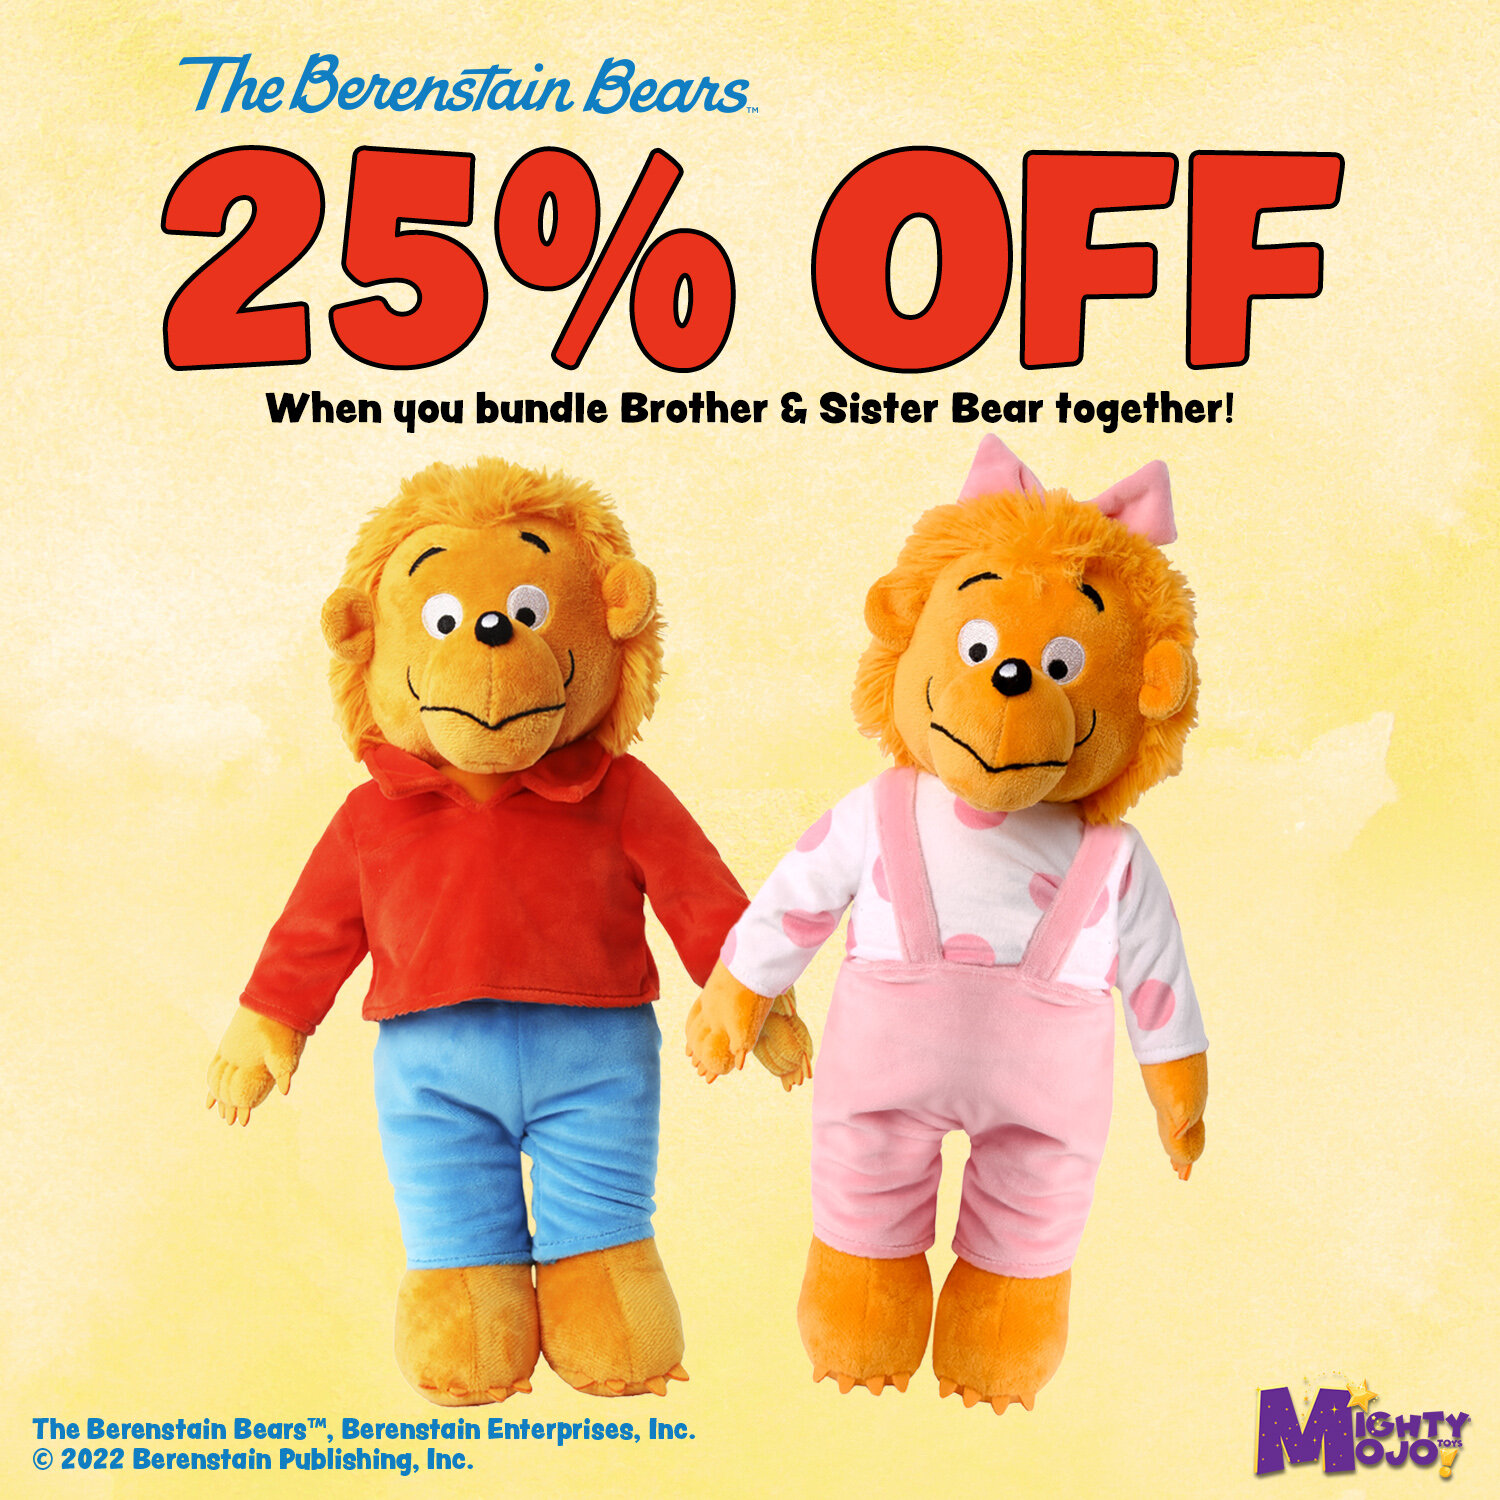 Save 25% off our Berenstain Bears Plush Bundle! Includes both our of best selling Plush Dolls. Hurry, expires November 28. Promo Code:BEARSBF - Link in bio

 #mightymojotoys #blackfriday2022 #blackfridaydeals #blackfriday #blackfridayweekend #plushie